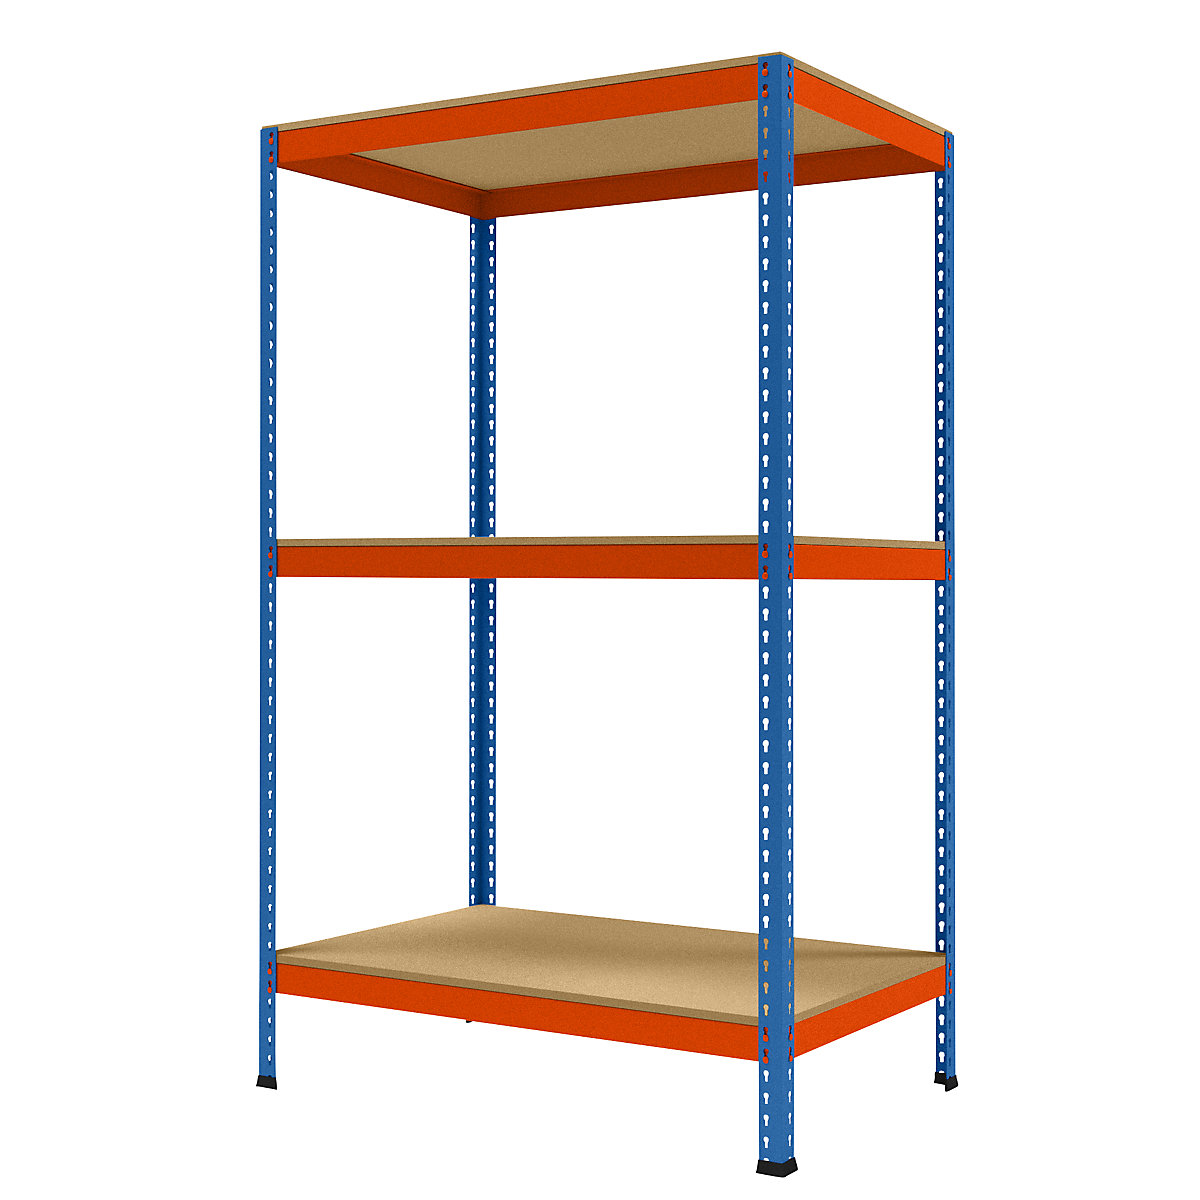 Wide span heavy duty shelving, height 1981 mm, overall depth 773 mm, width 1231 mm